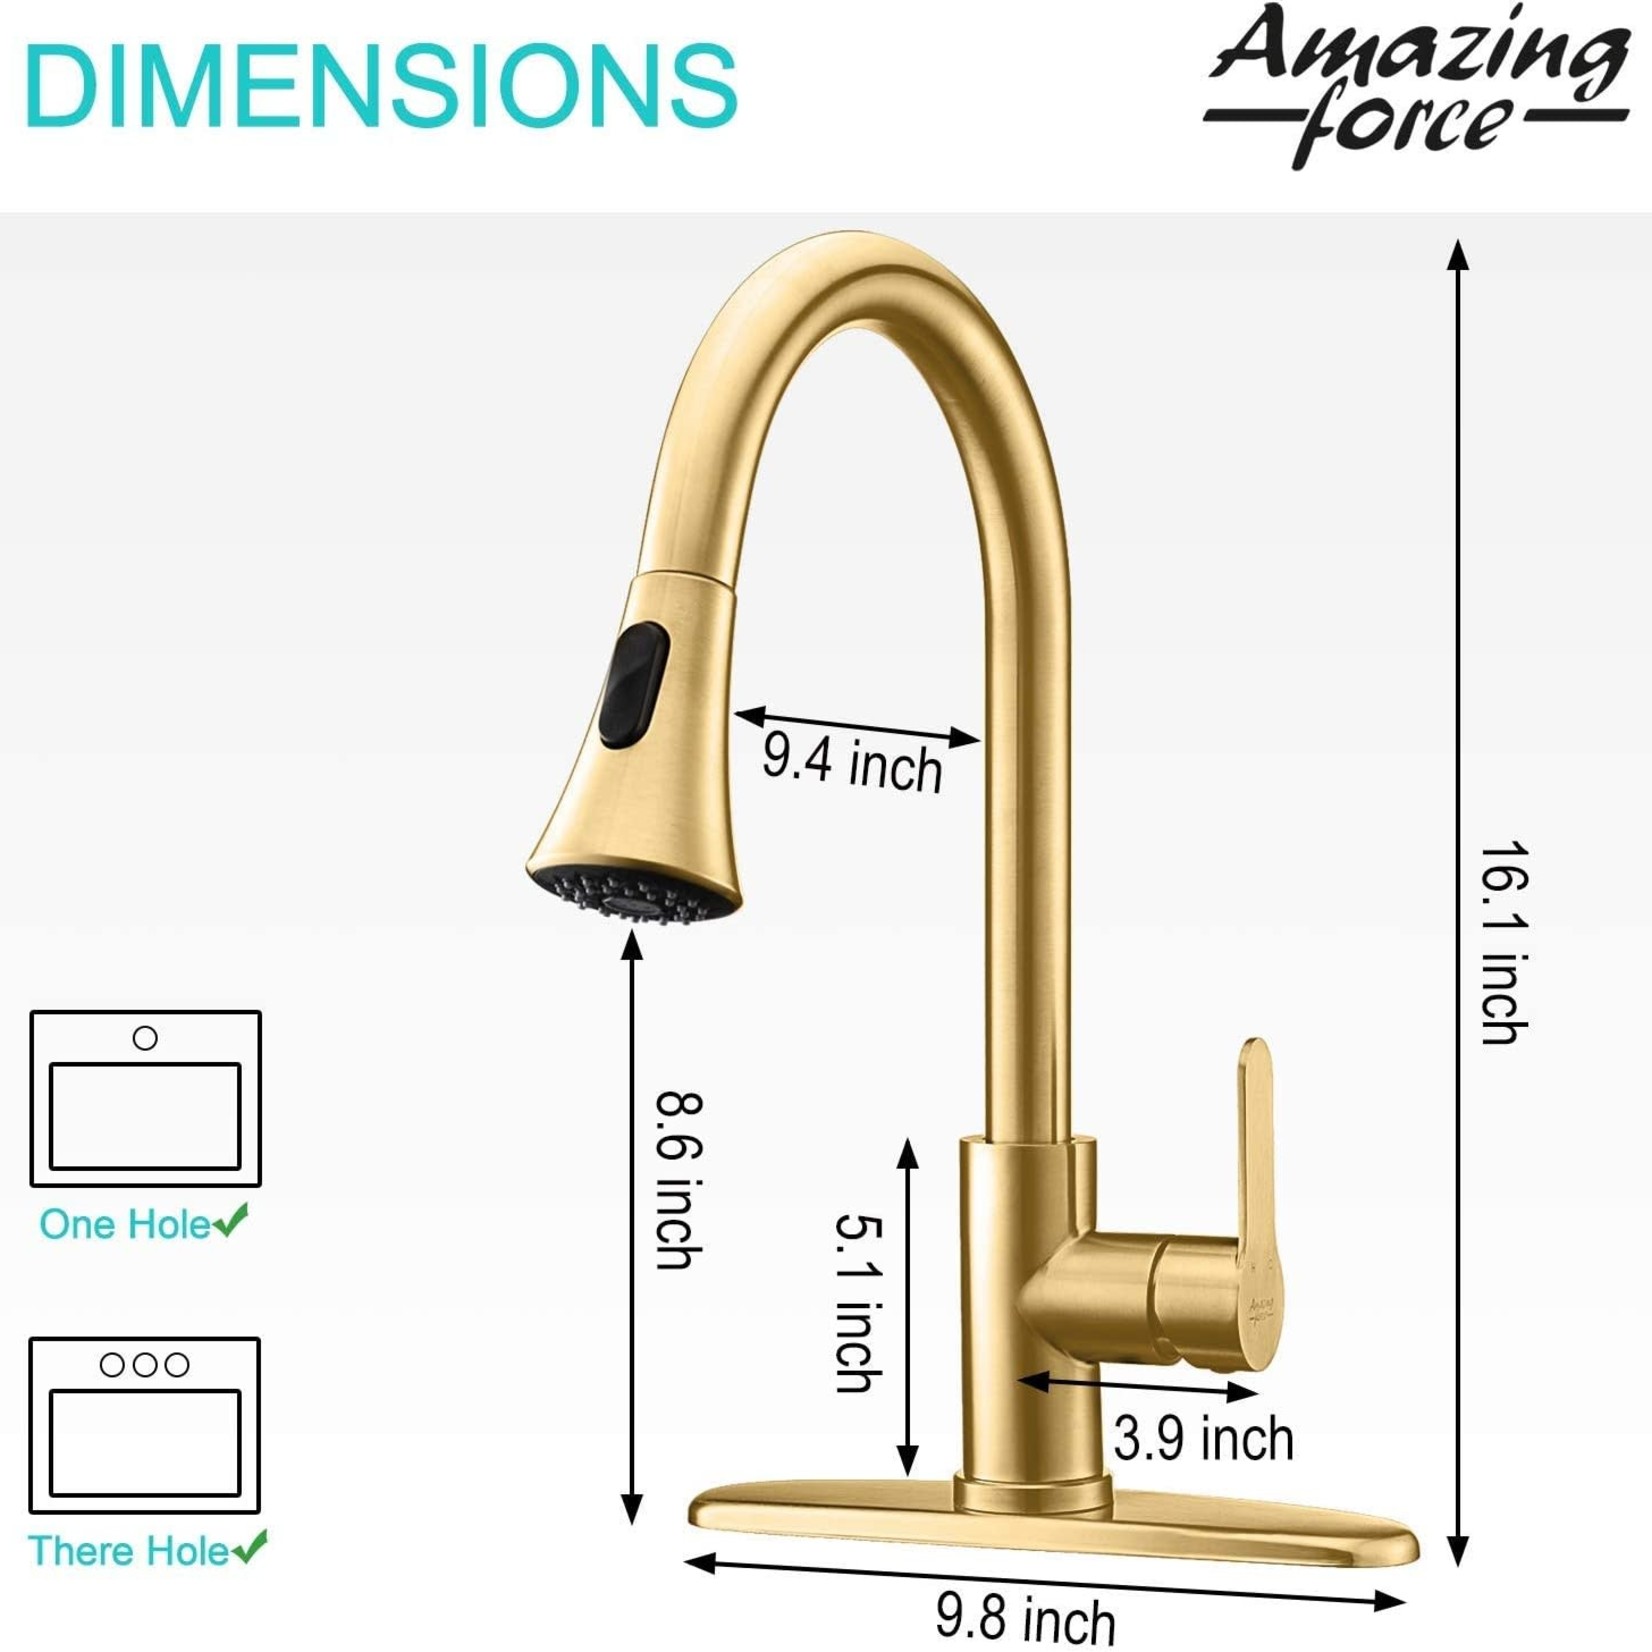 Amazing Force Modern Kitchen Faucet